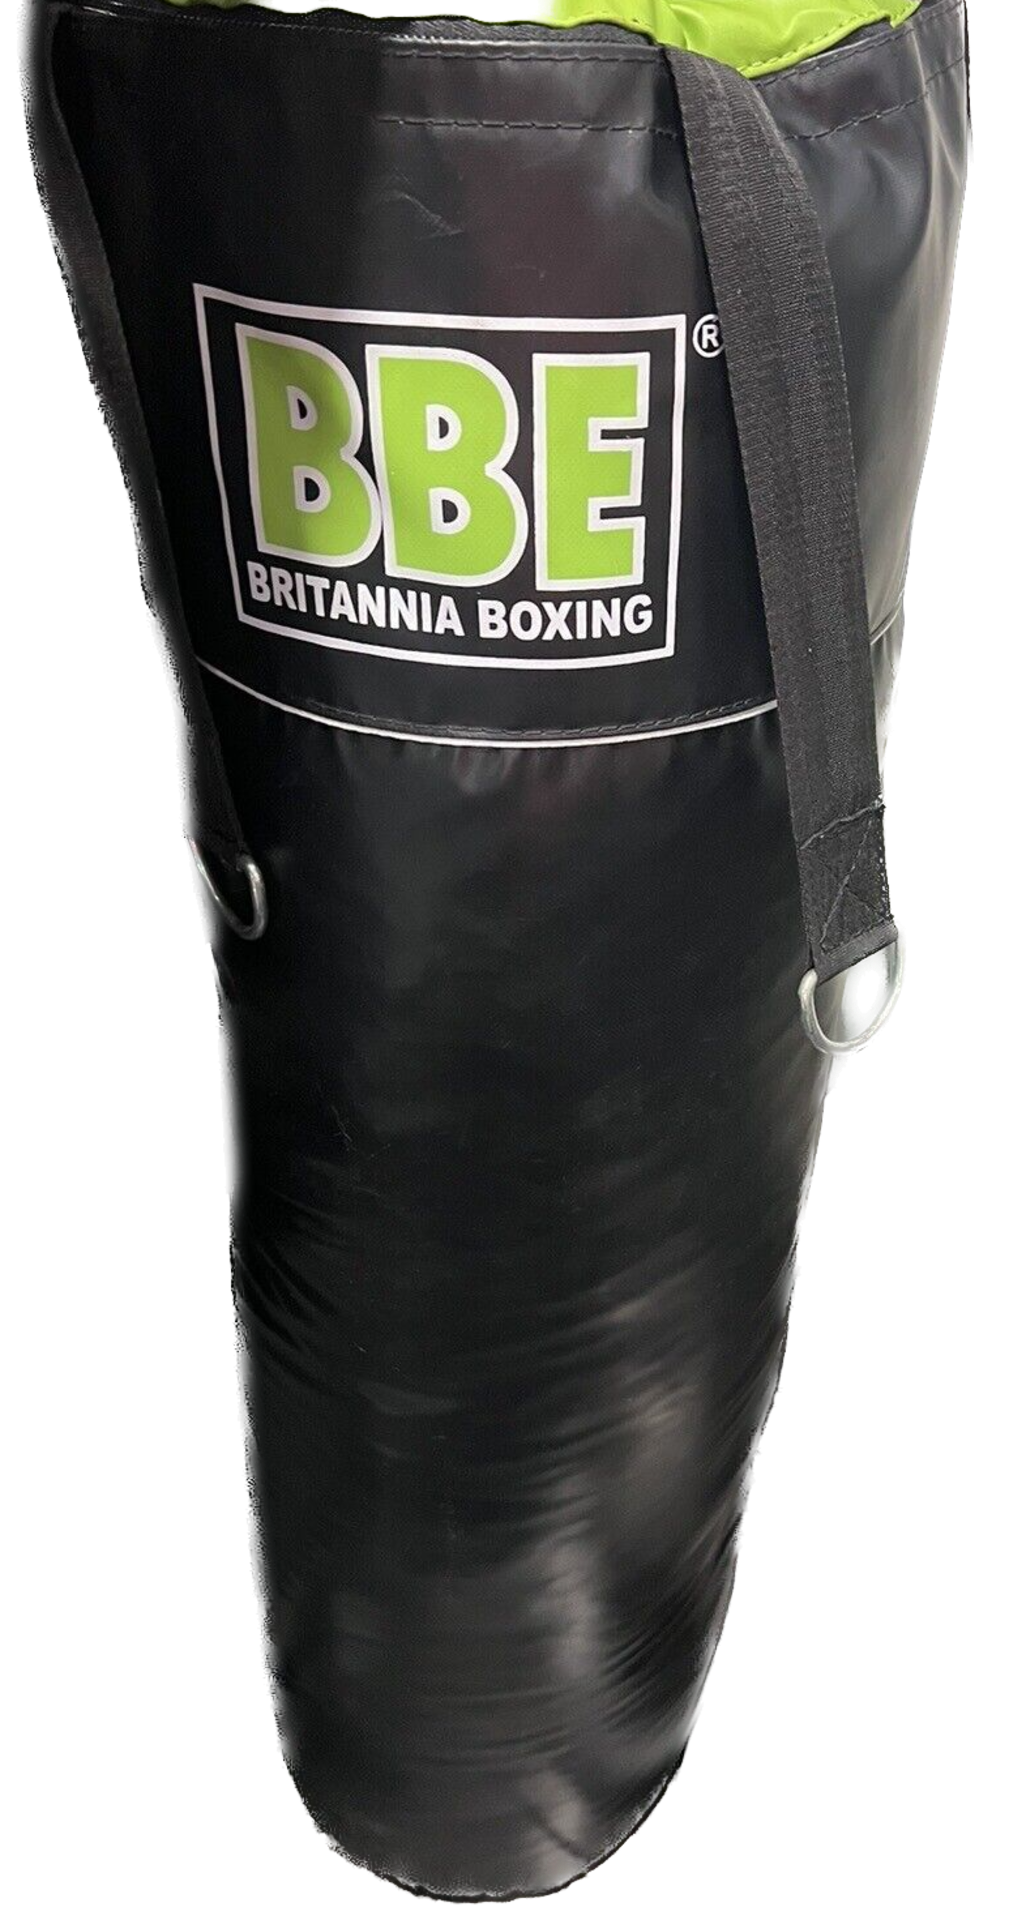 BBE Britannia Boxing Punch Bag - Great Condition - Image 4 of 4